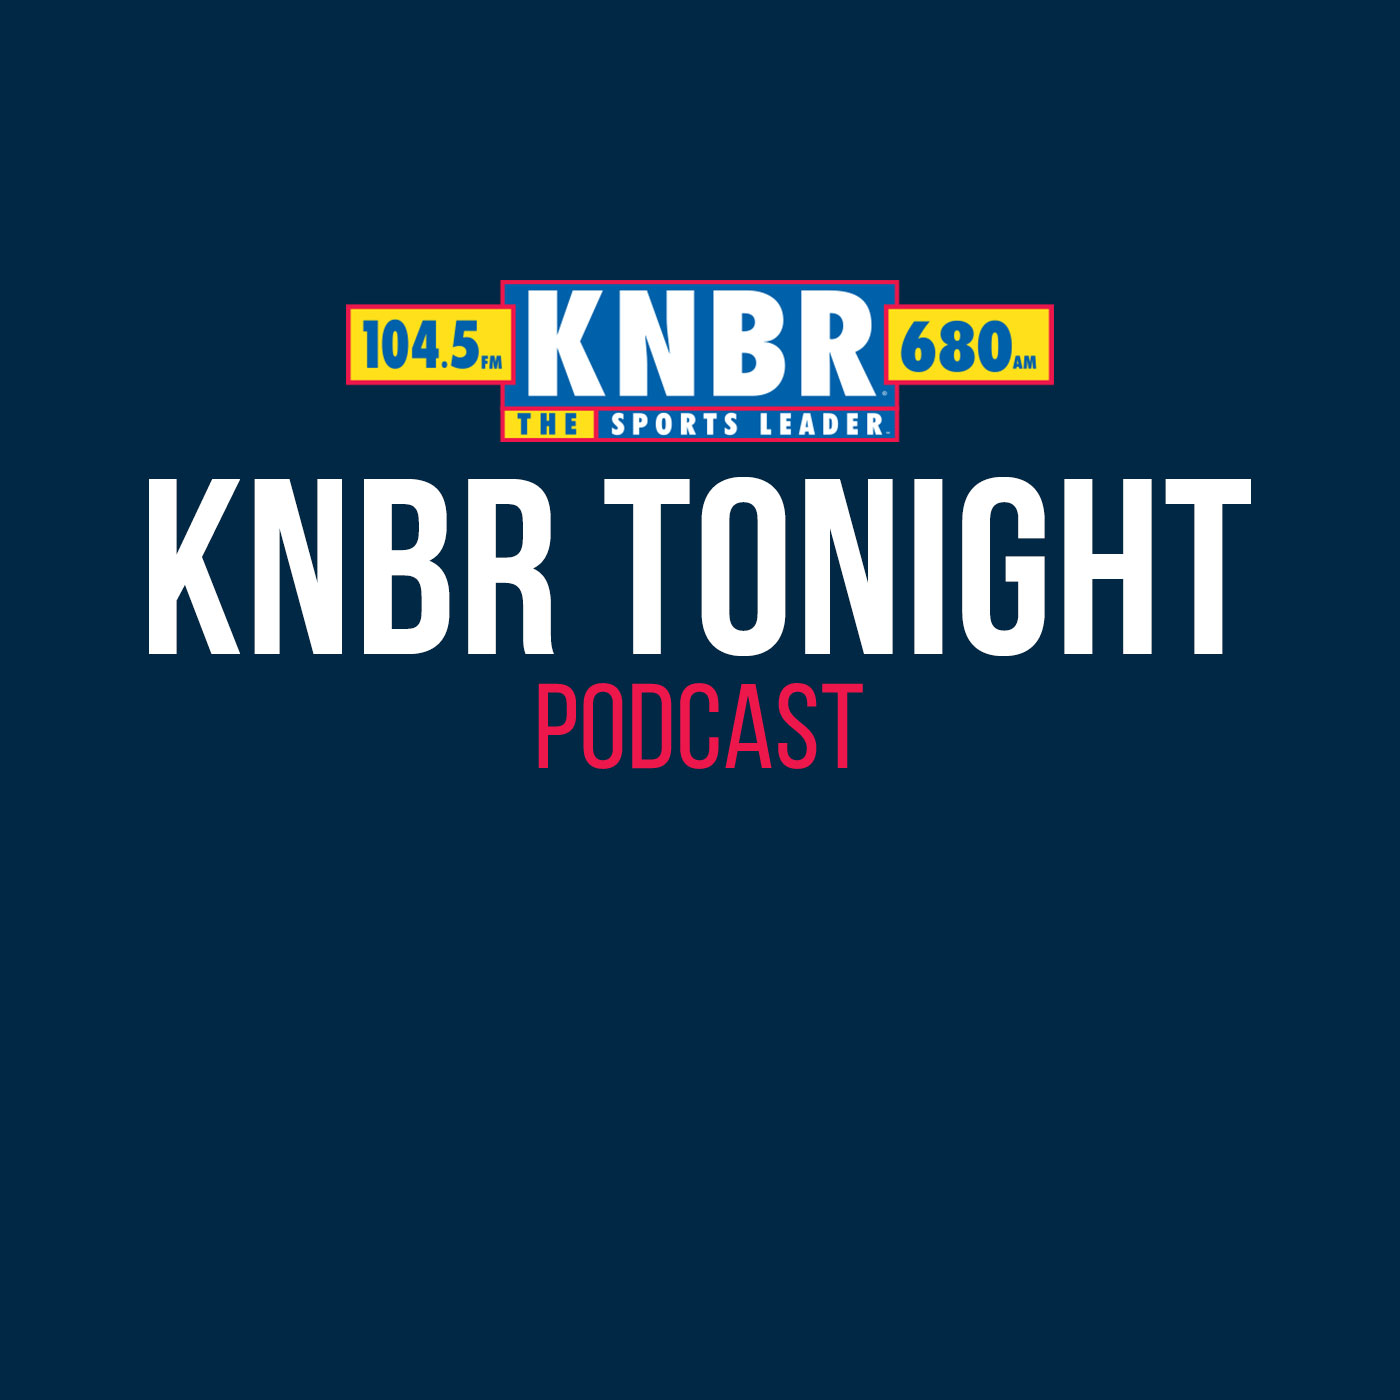 11-10 Doc Holliday joins Kerry Crowley on KNBR Tonight to preview the 49ers upcoming matchup against the Rams on Monday Night Football